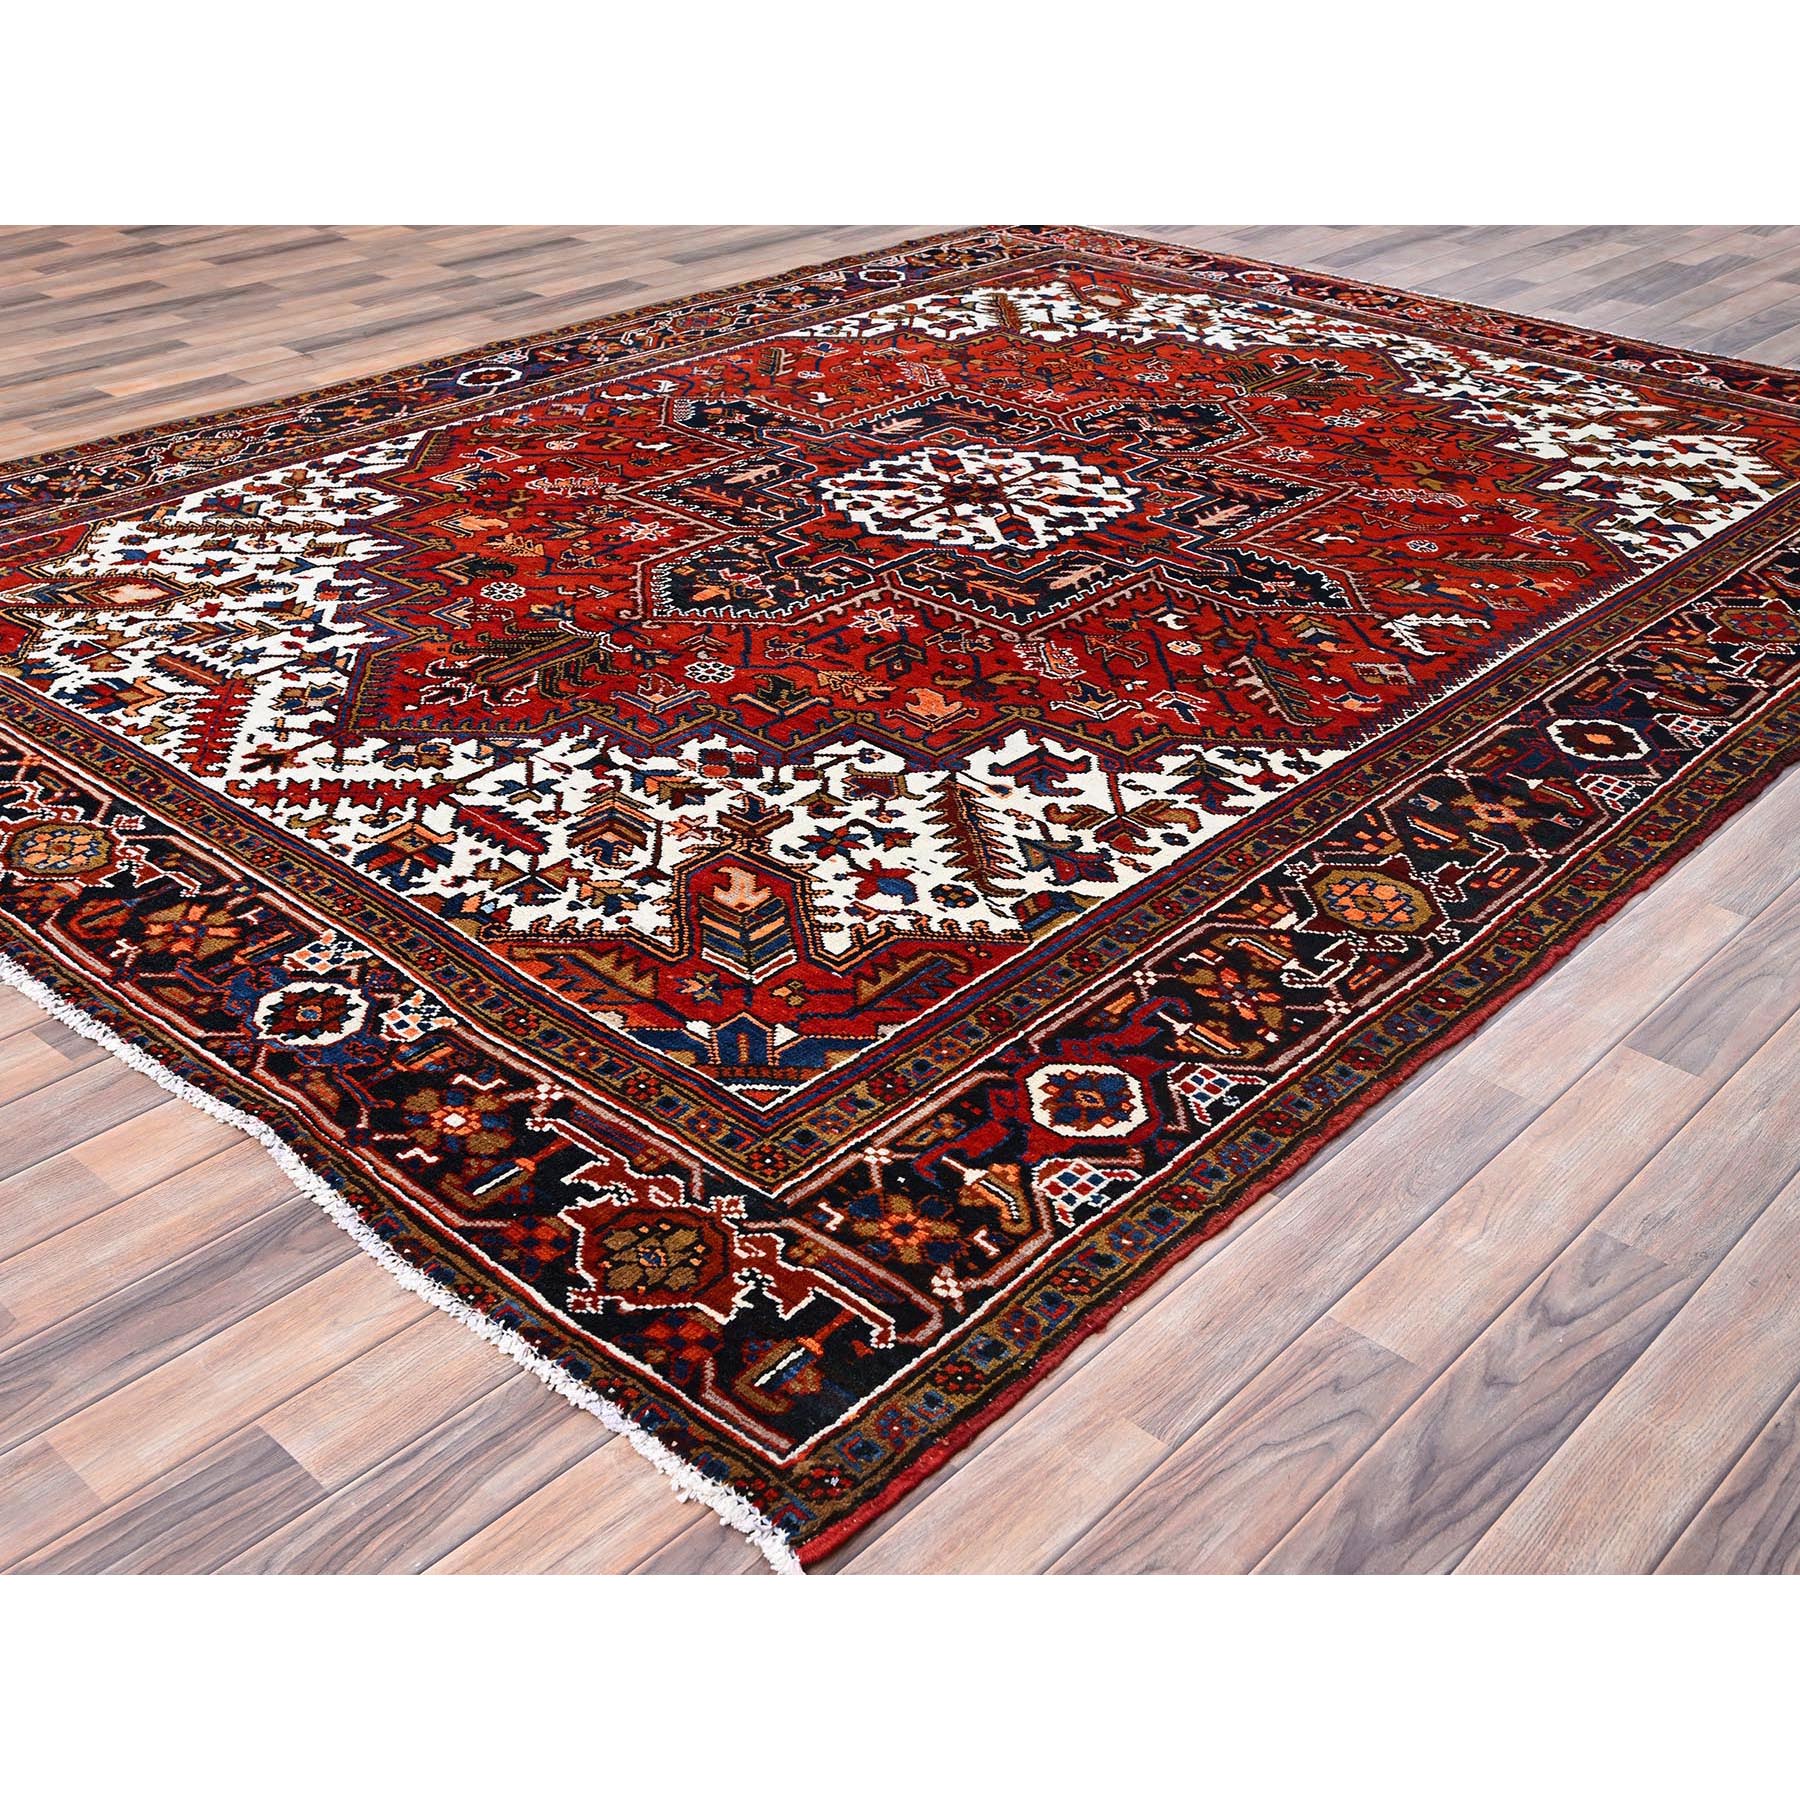 8'5"x10'9" Tomato Red, Pure Wool, Hand Woven, Semi Antique Persian Heriz, Good Condition, Distressed Feel, Evenly Worn, Oriental Rug 